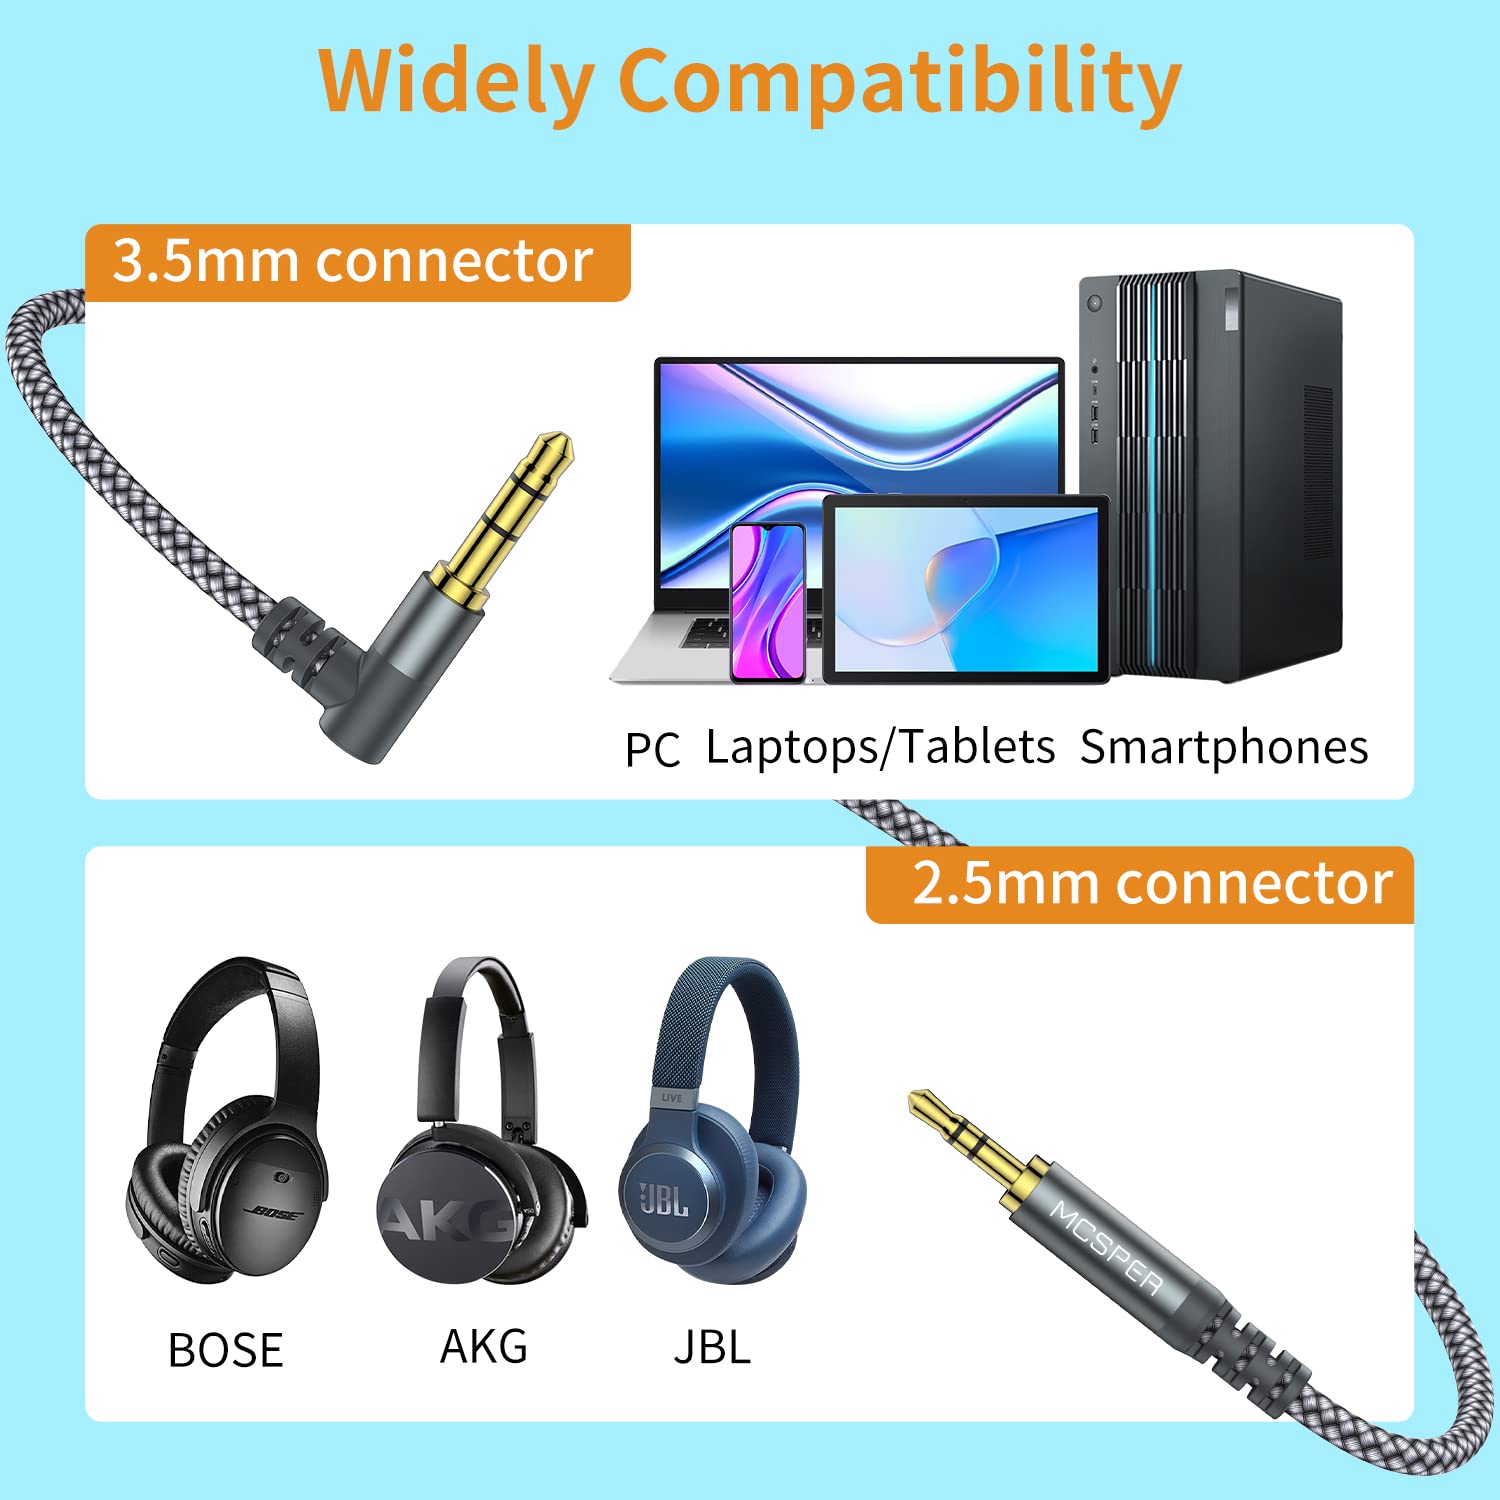 3.5mm to 2.5mm Aux Audio Cable (6.6FT), 90 Degree Right Cord Compatible with Bose 700 QuietComfort QC45 QC35II QC35 QC25 Noise Cancelling Headphones, JBL E45BT E55BT E65BTNC Bluetooth Earphone(Grey)